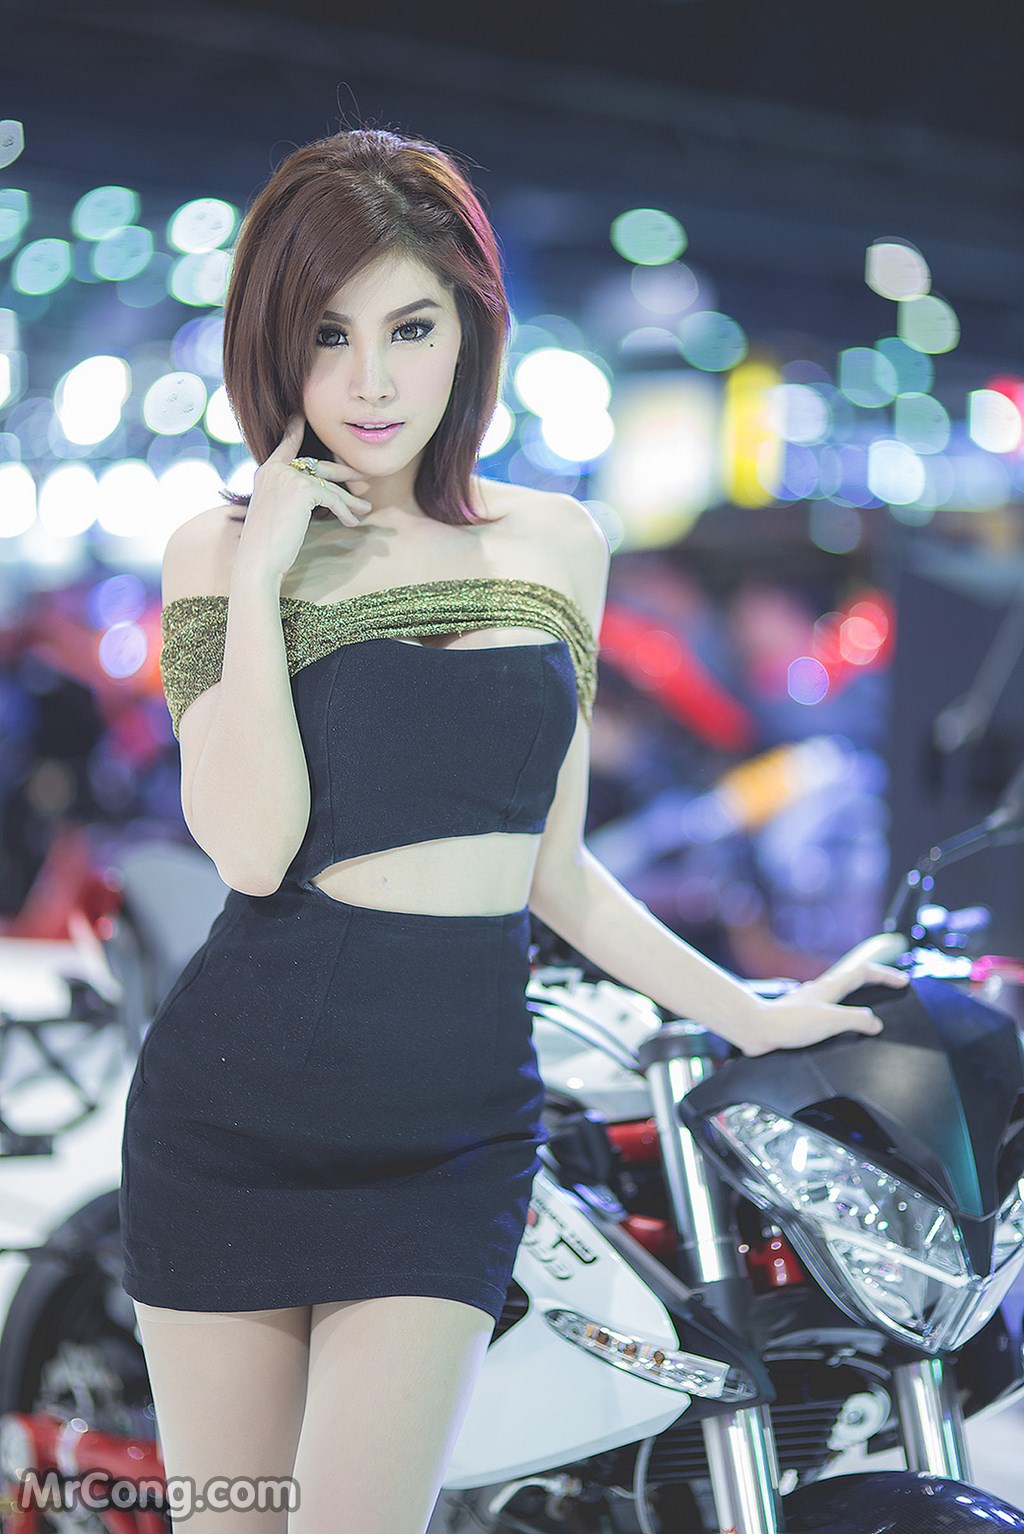 Beautiful and sexy Thai girls - Part 1 (415 photos)